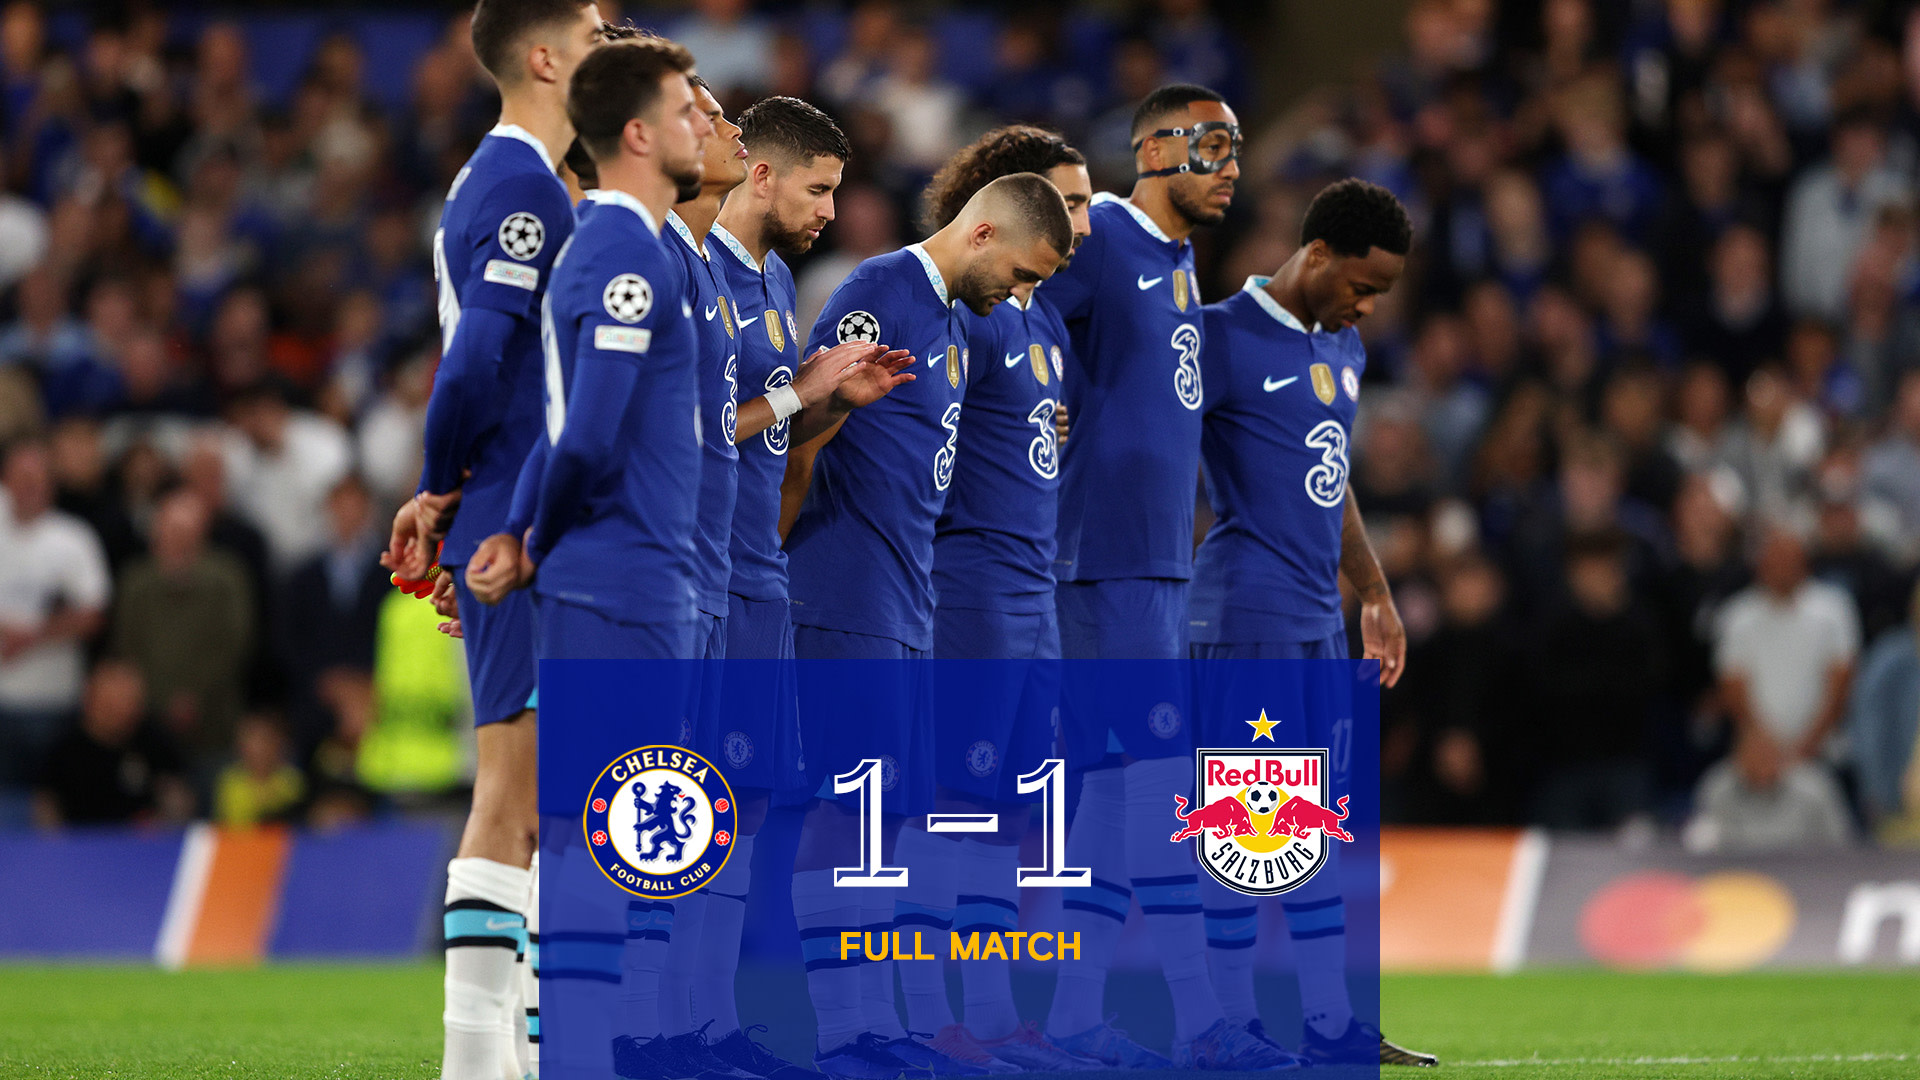 Chelsea 1-1 RB Salzburg Champions League Full Match Video Official Site Chelsea Football Club